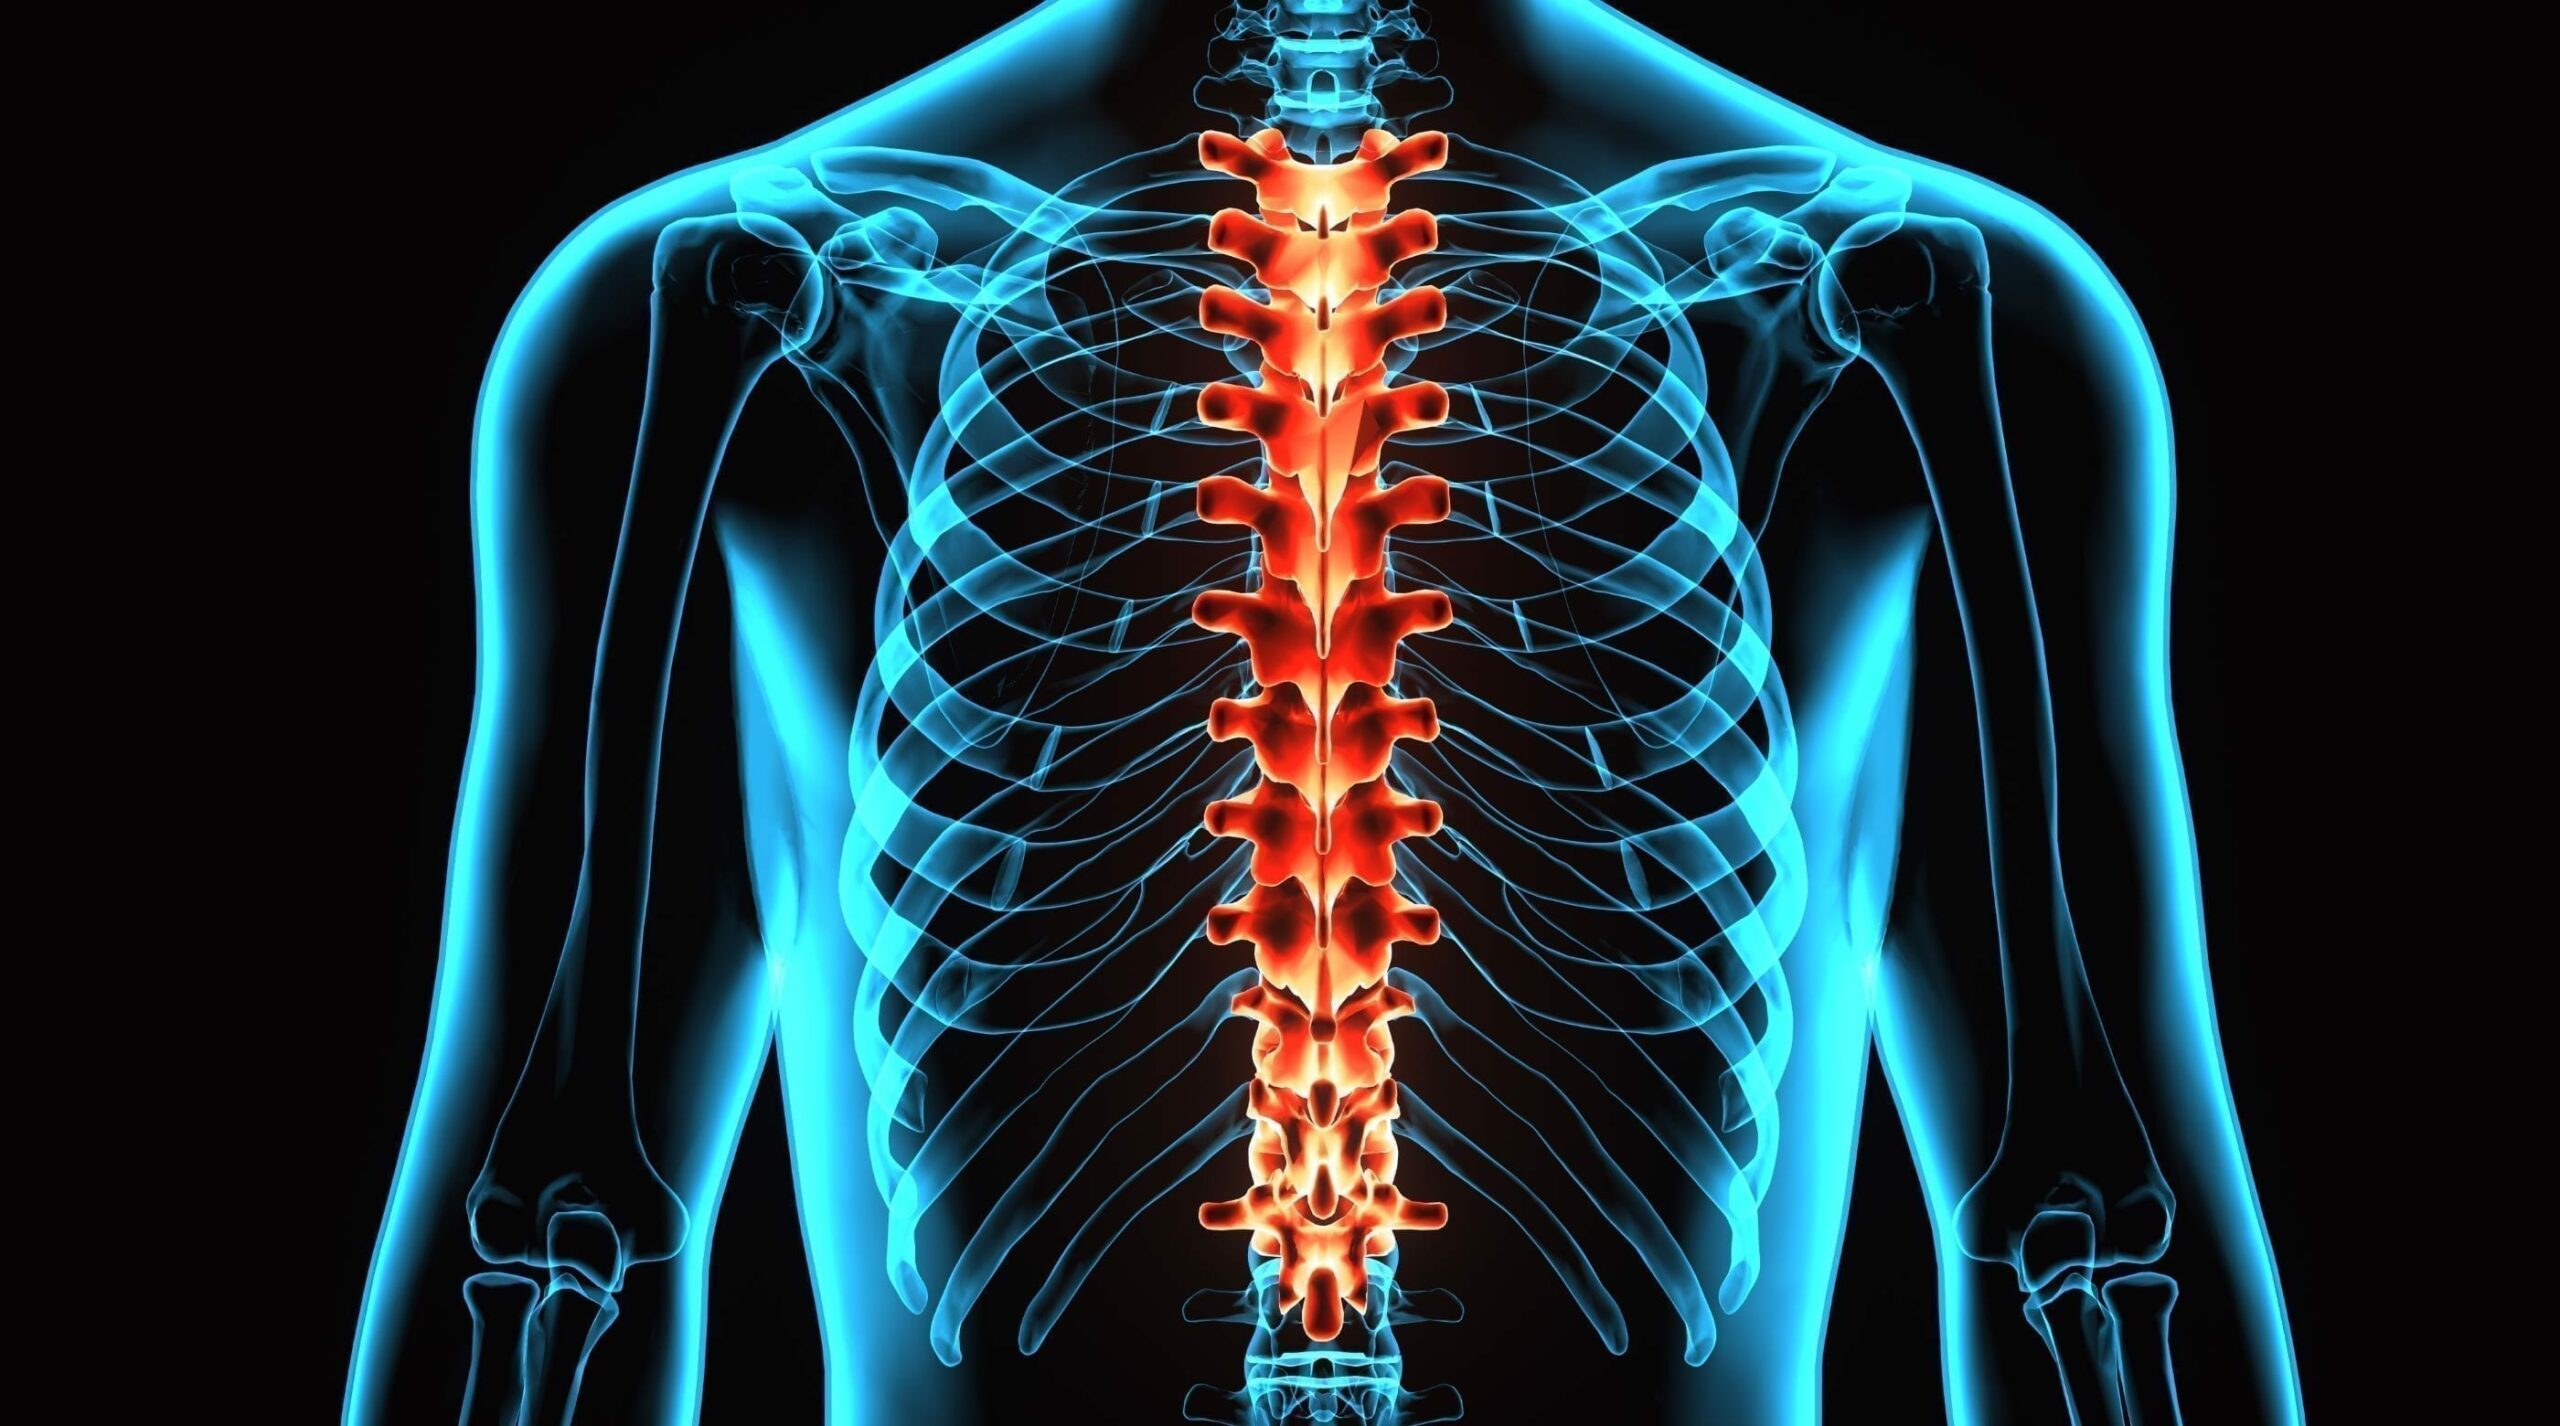 Thoracic Spine Assessment and Treatment